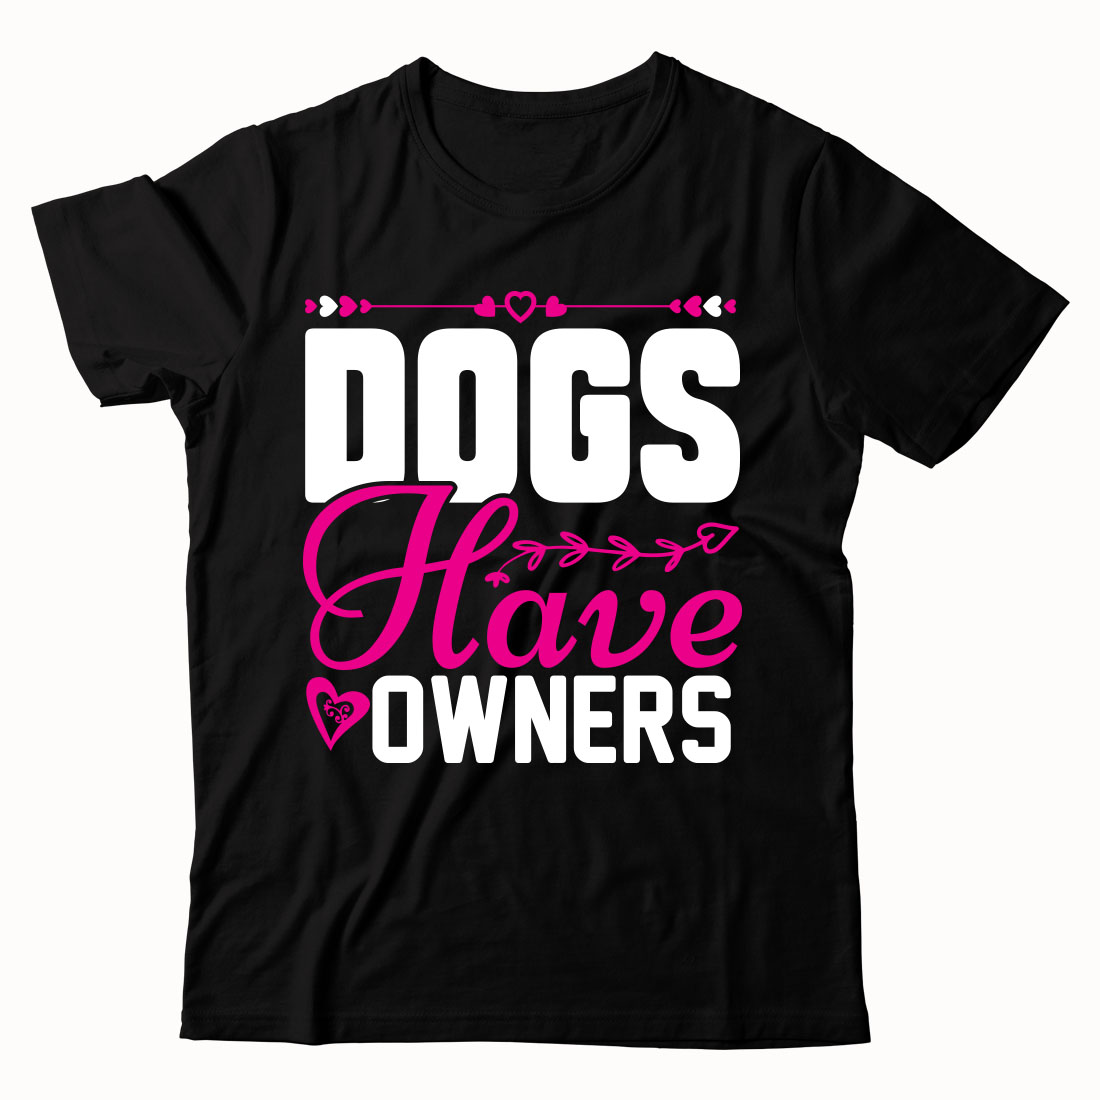 Black t - shirt that says dogs have owners.